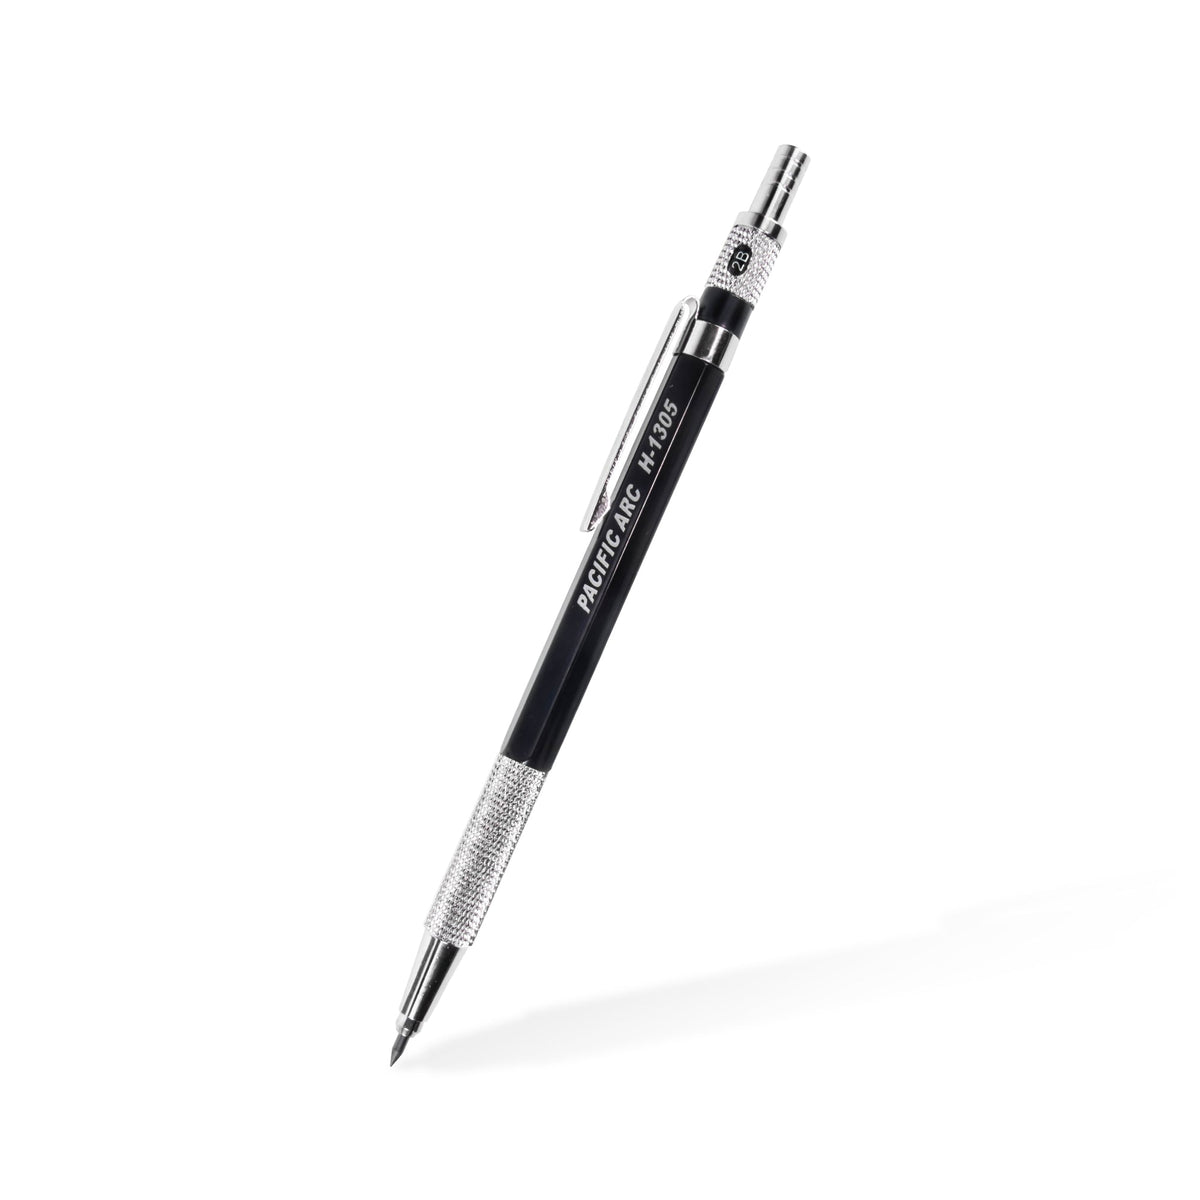 Pacific Arc, 2mm Lead Holder and Lead Sharpener, Drafting Pencil for Artist Drawing, Drafting, and Sketching